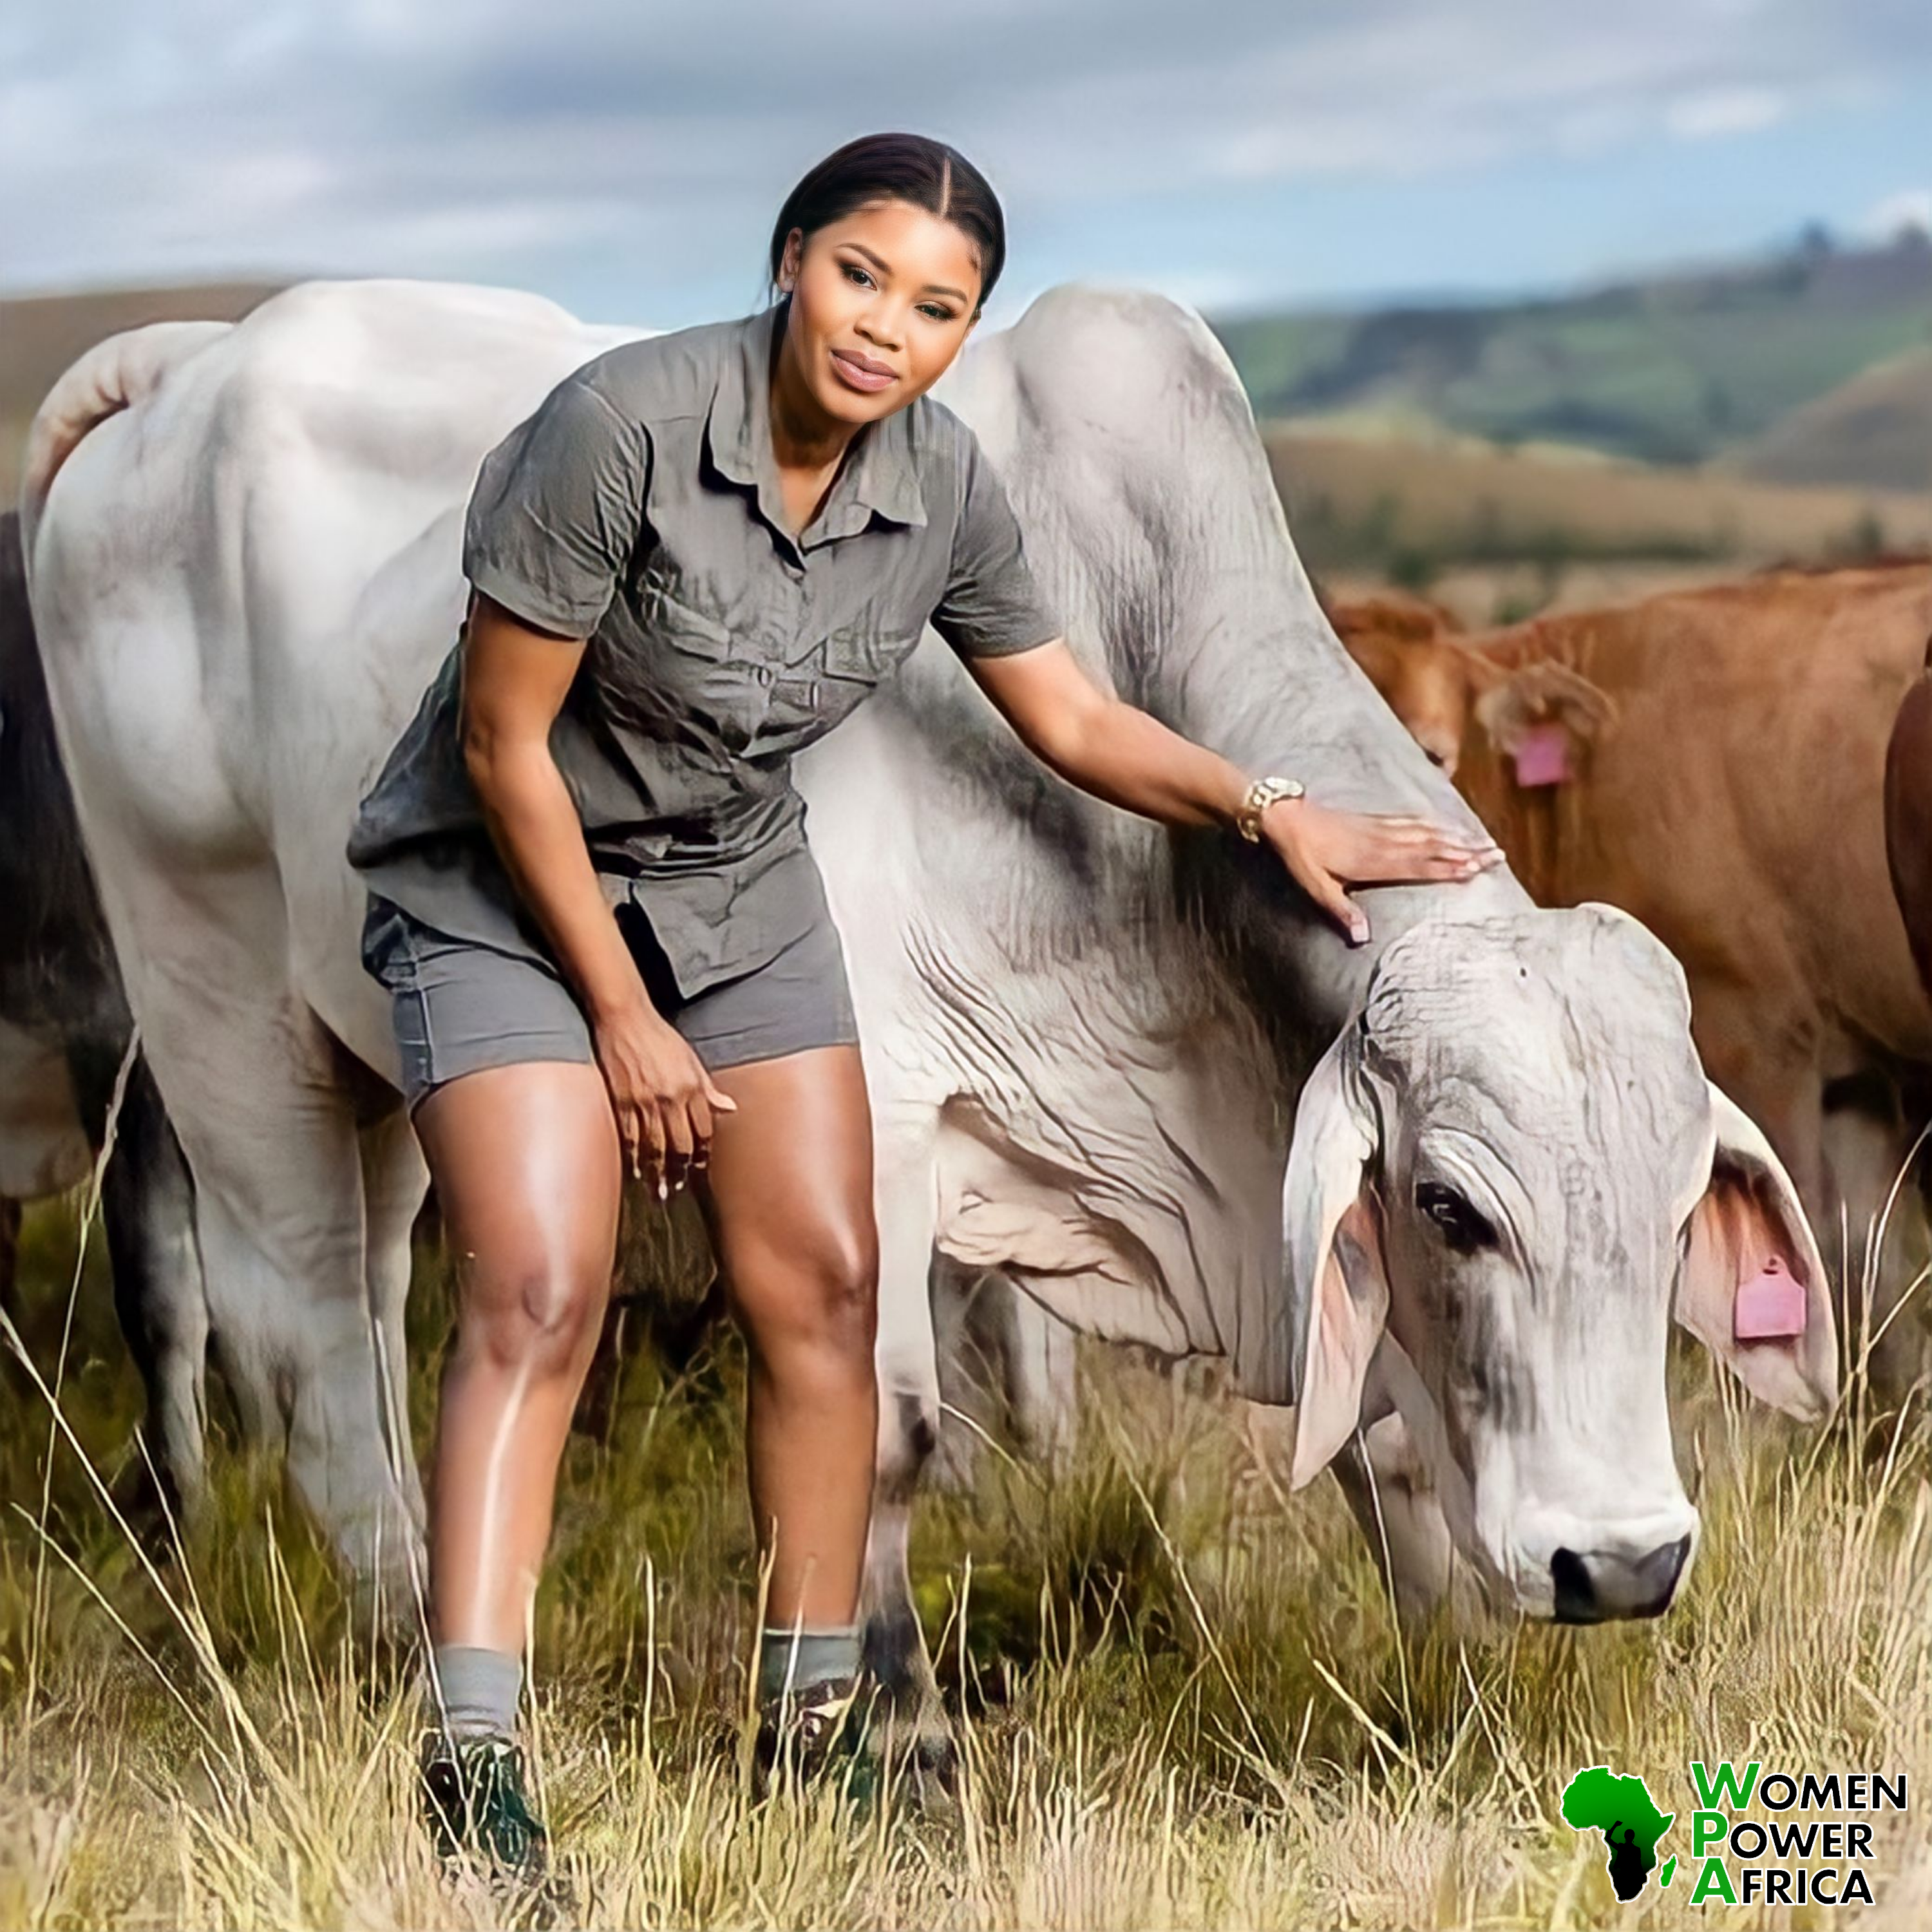 Ayanda Zulu: From no background in agriculture to a remarkable Farmer.